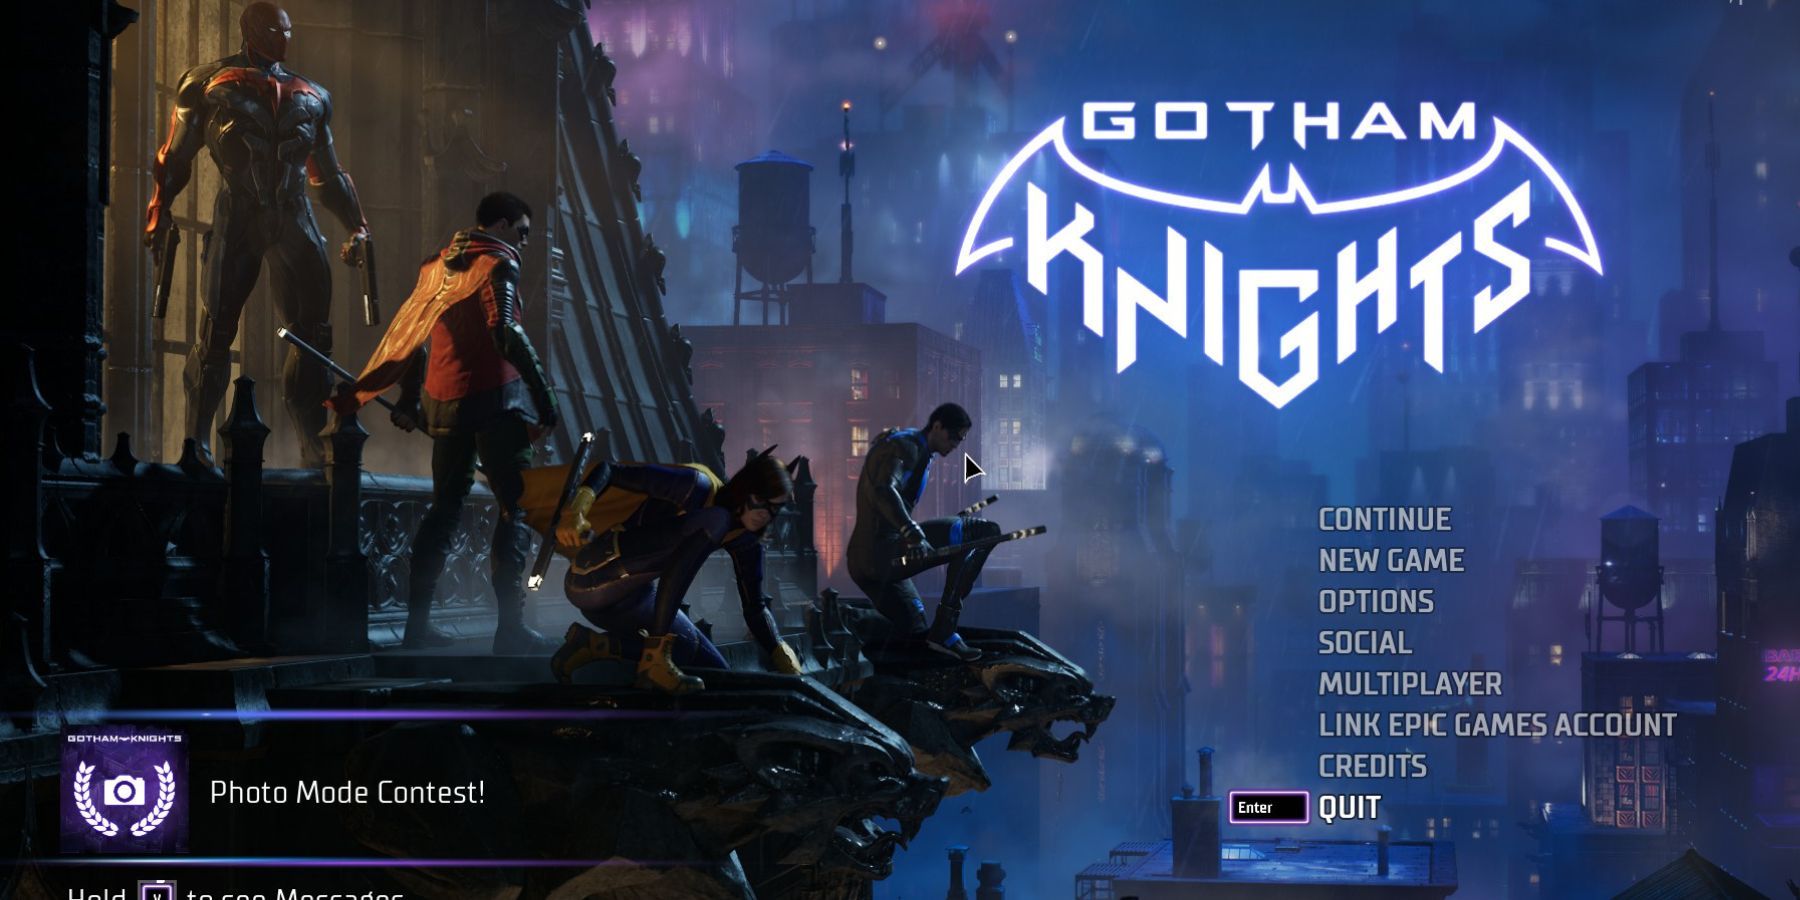 Gotham Knights tips: 13 things to know before starting - Polygon